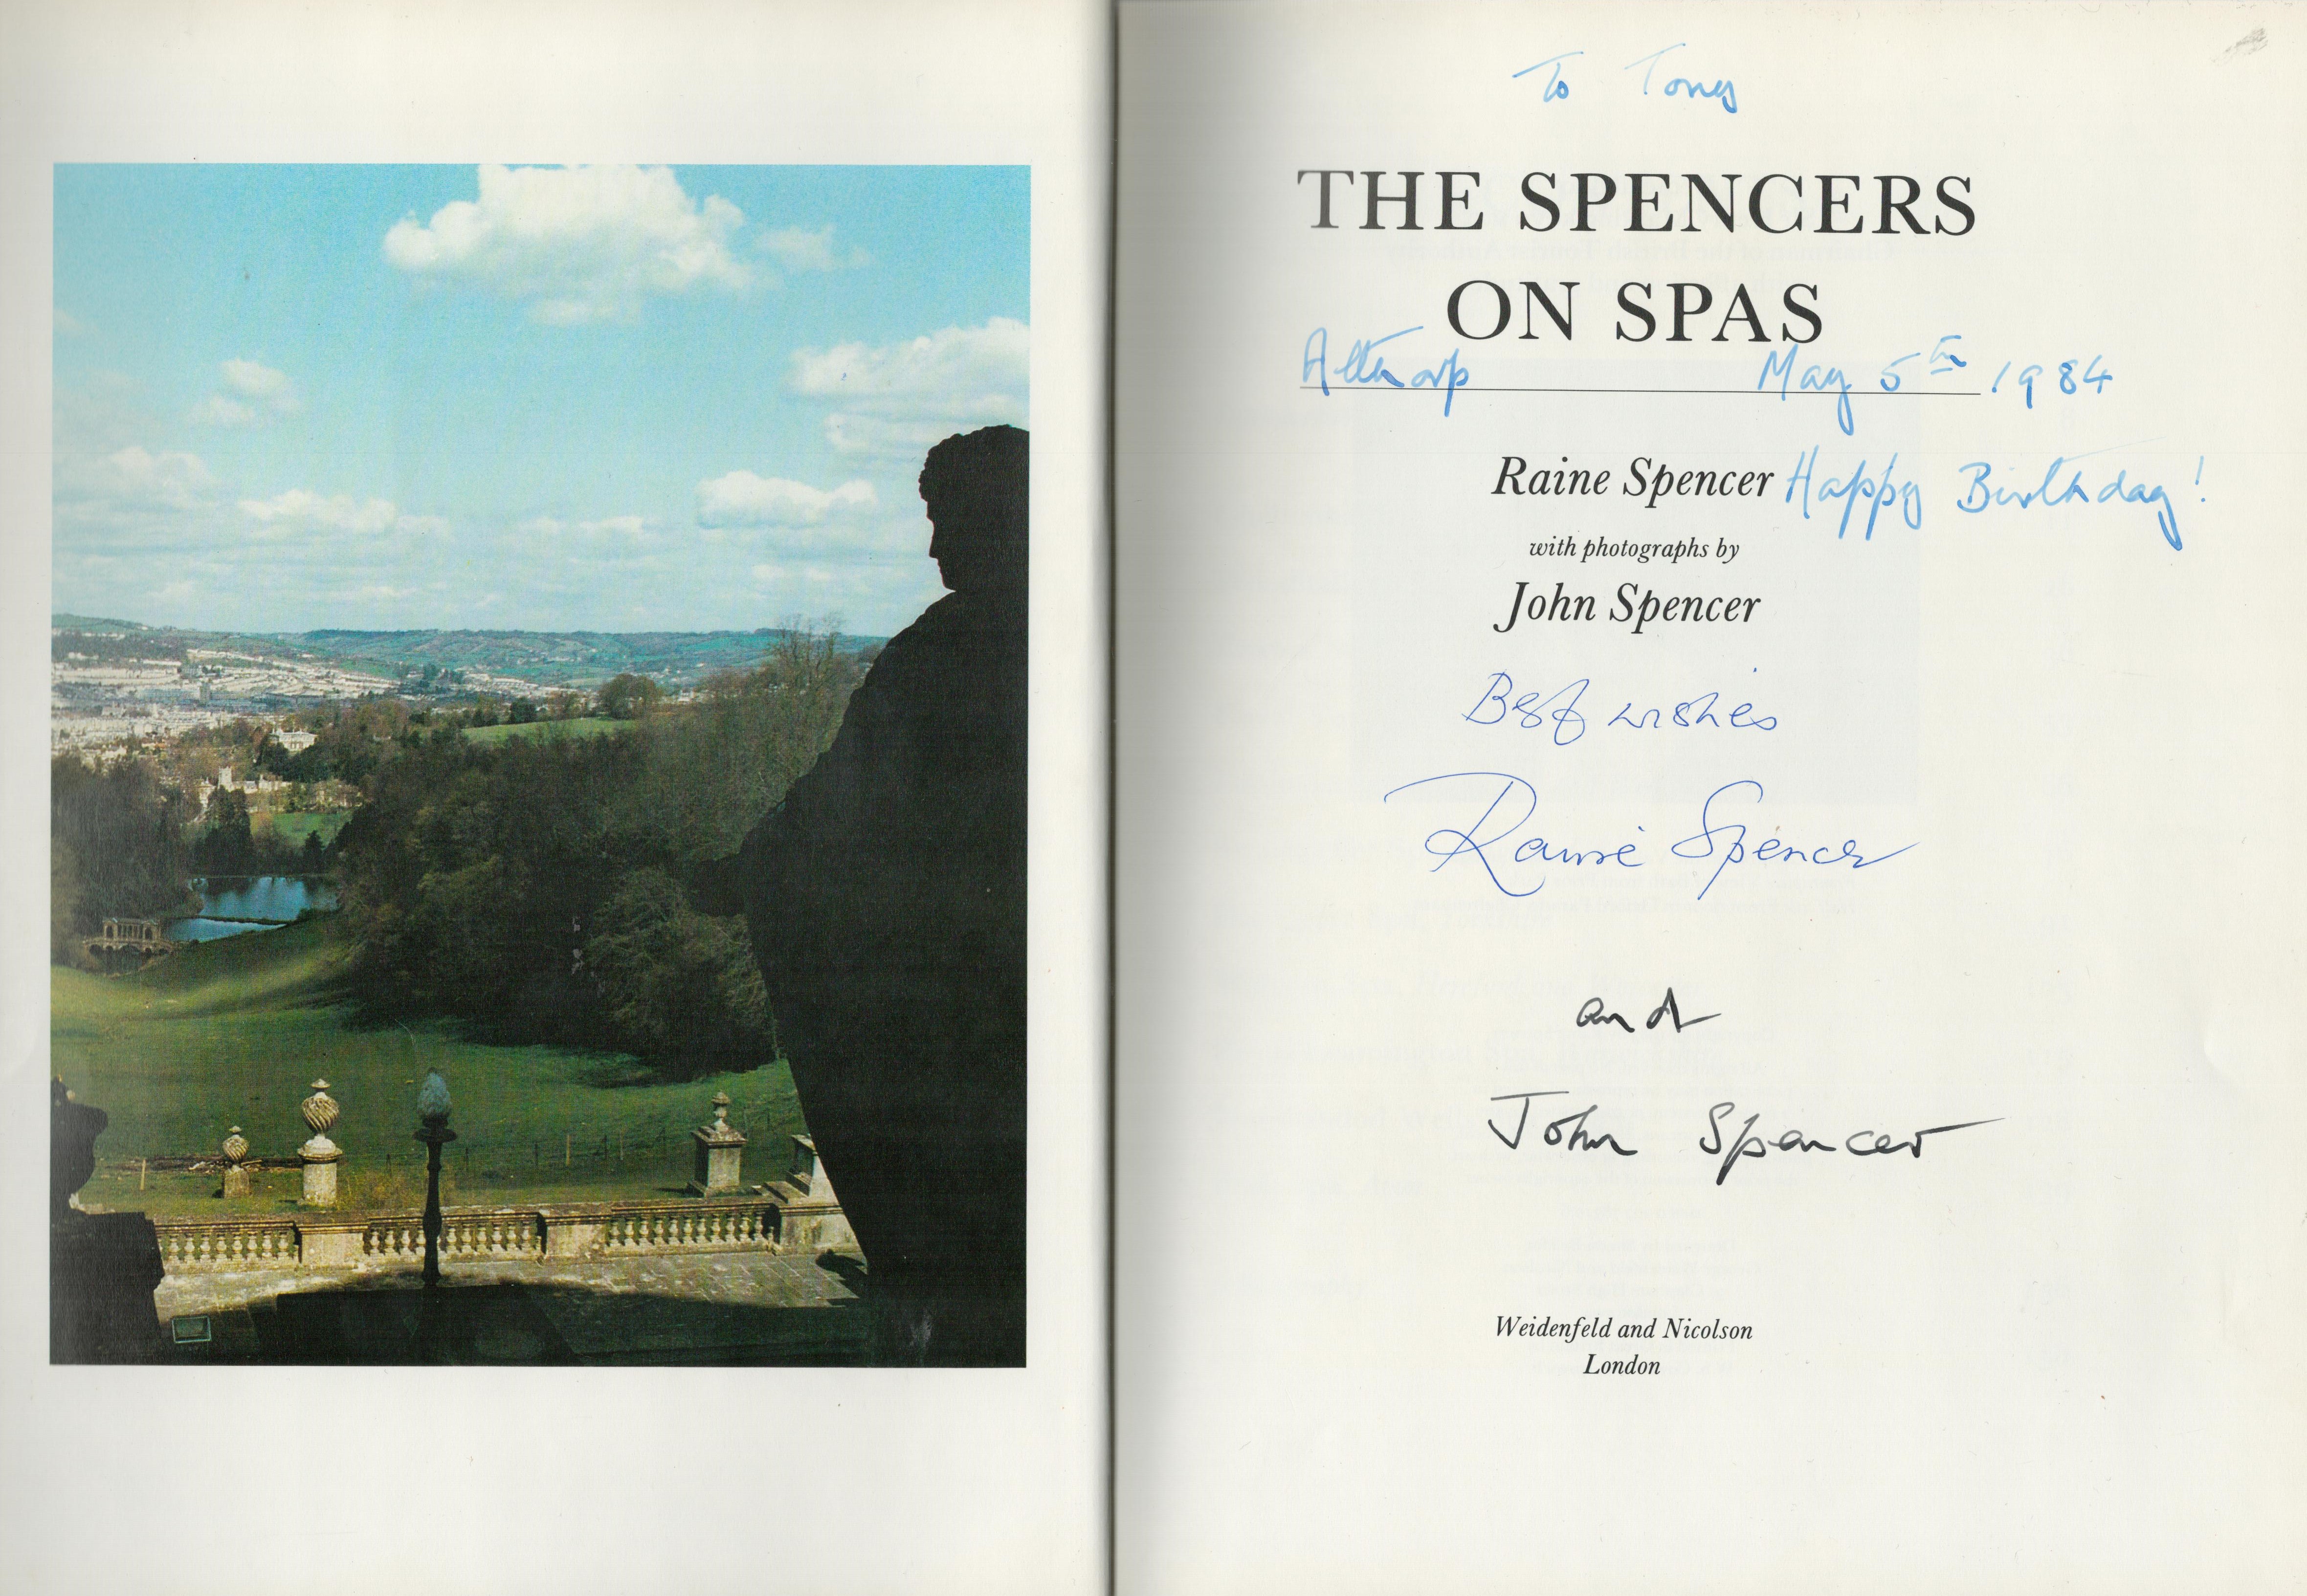 The Spencers on Spas hardback book signed by Raine Spencer and John Spencer. All autographs come - Image 2 of 3